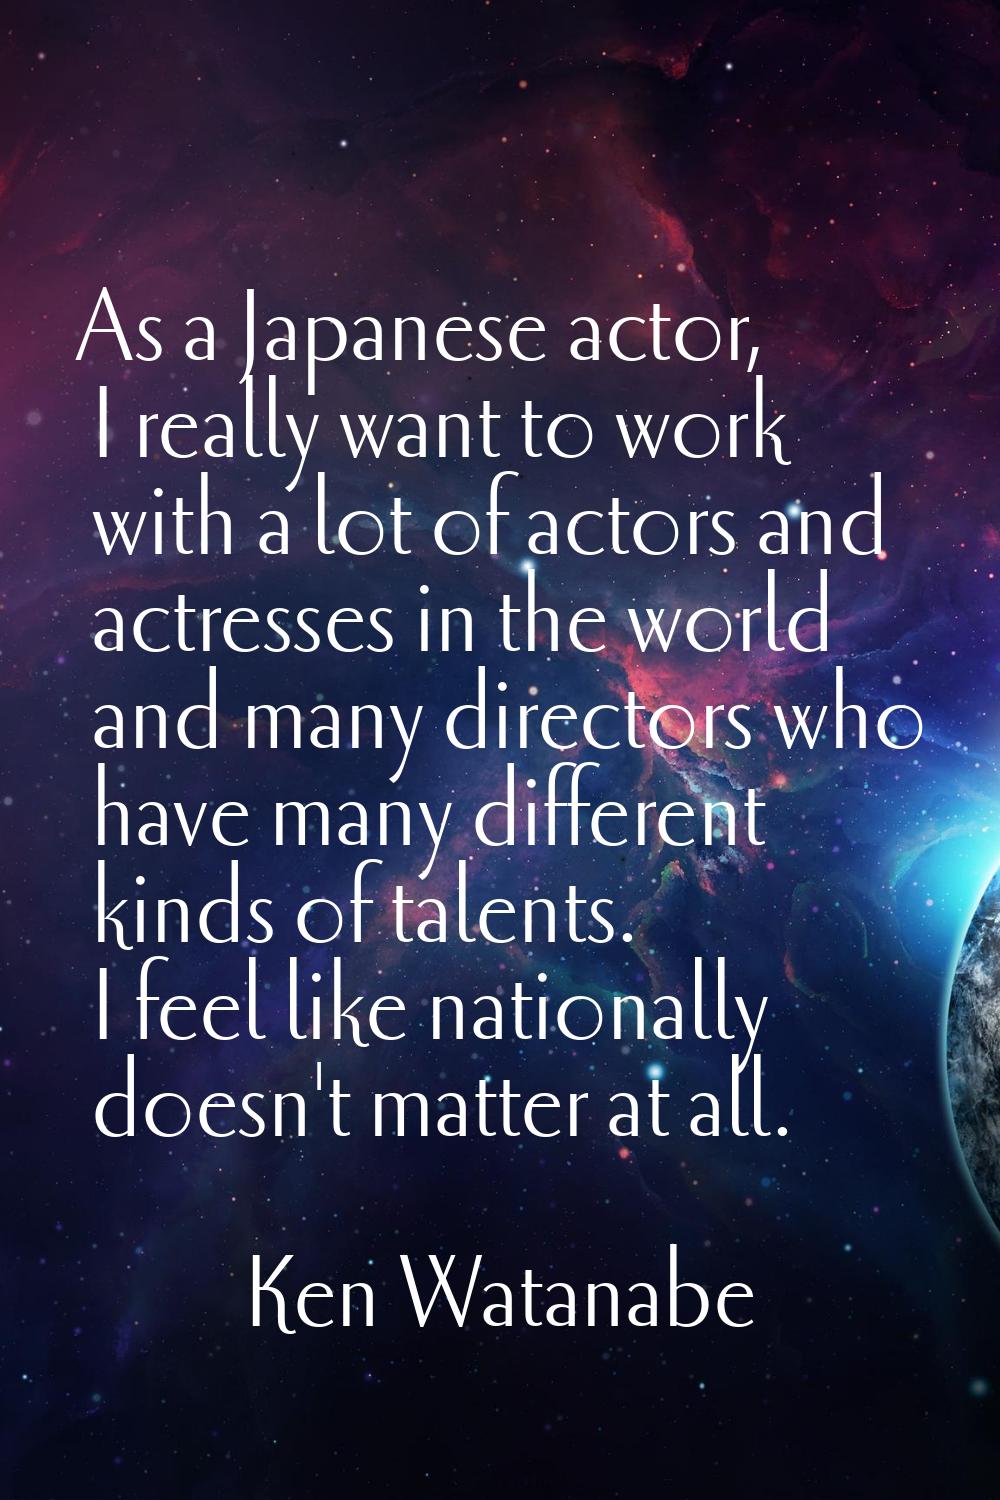 As a Japanese actor, I really want to work with a lot of actors and actresses in the world and many